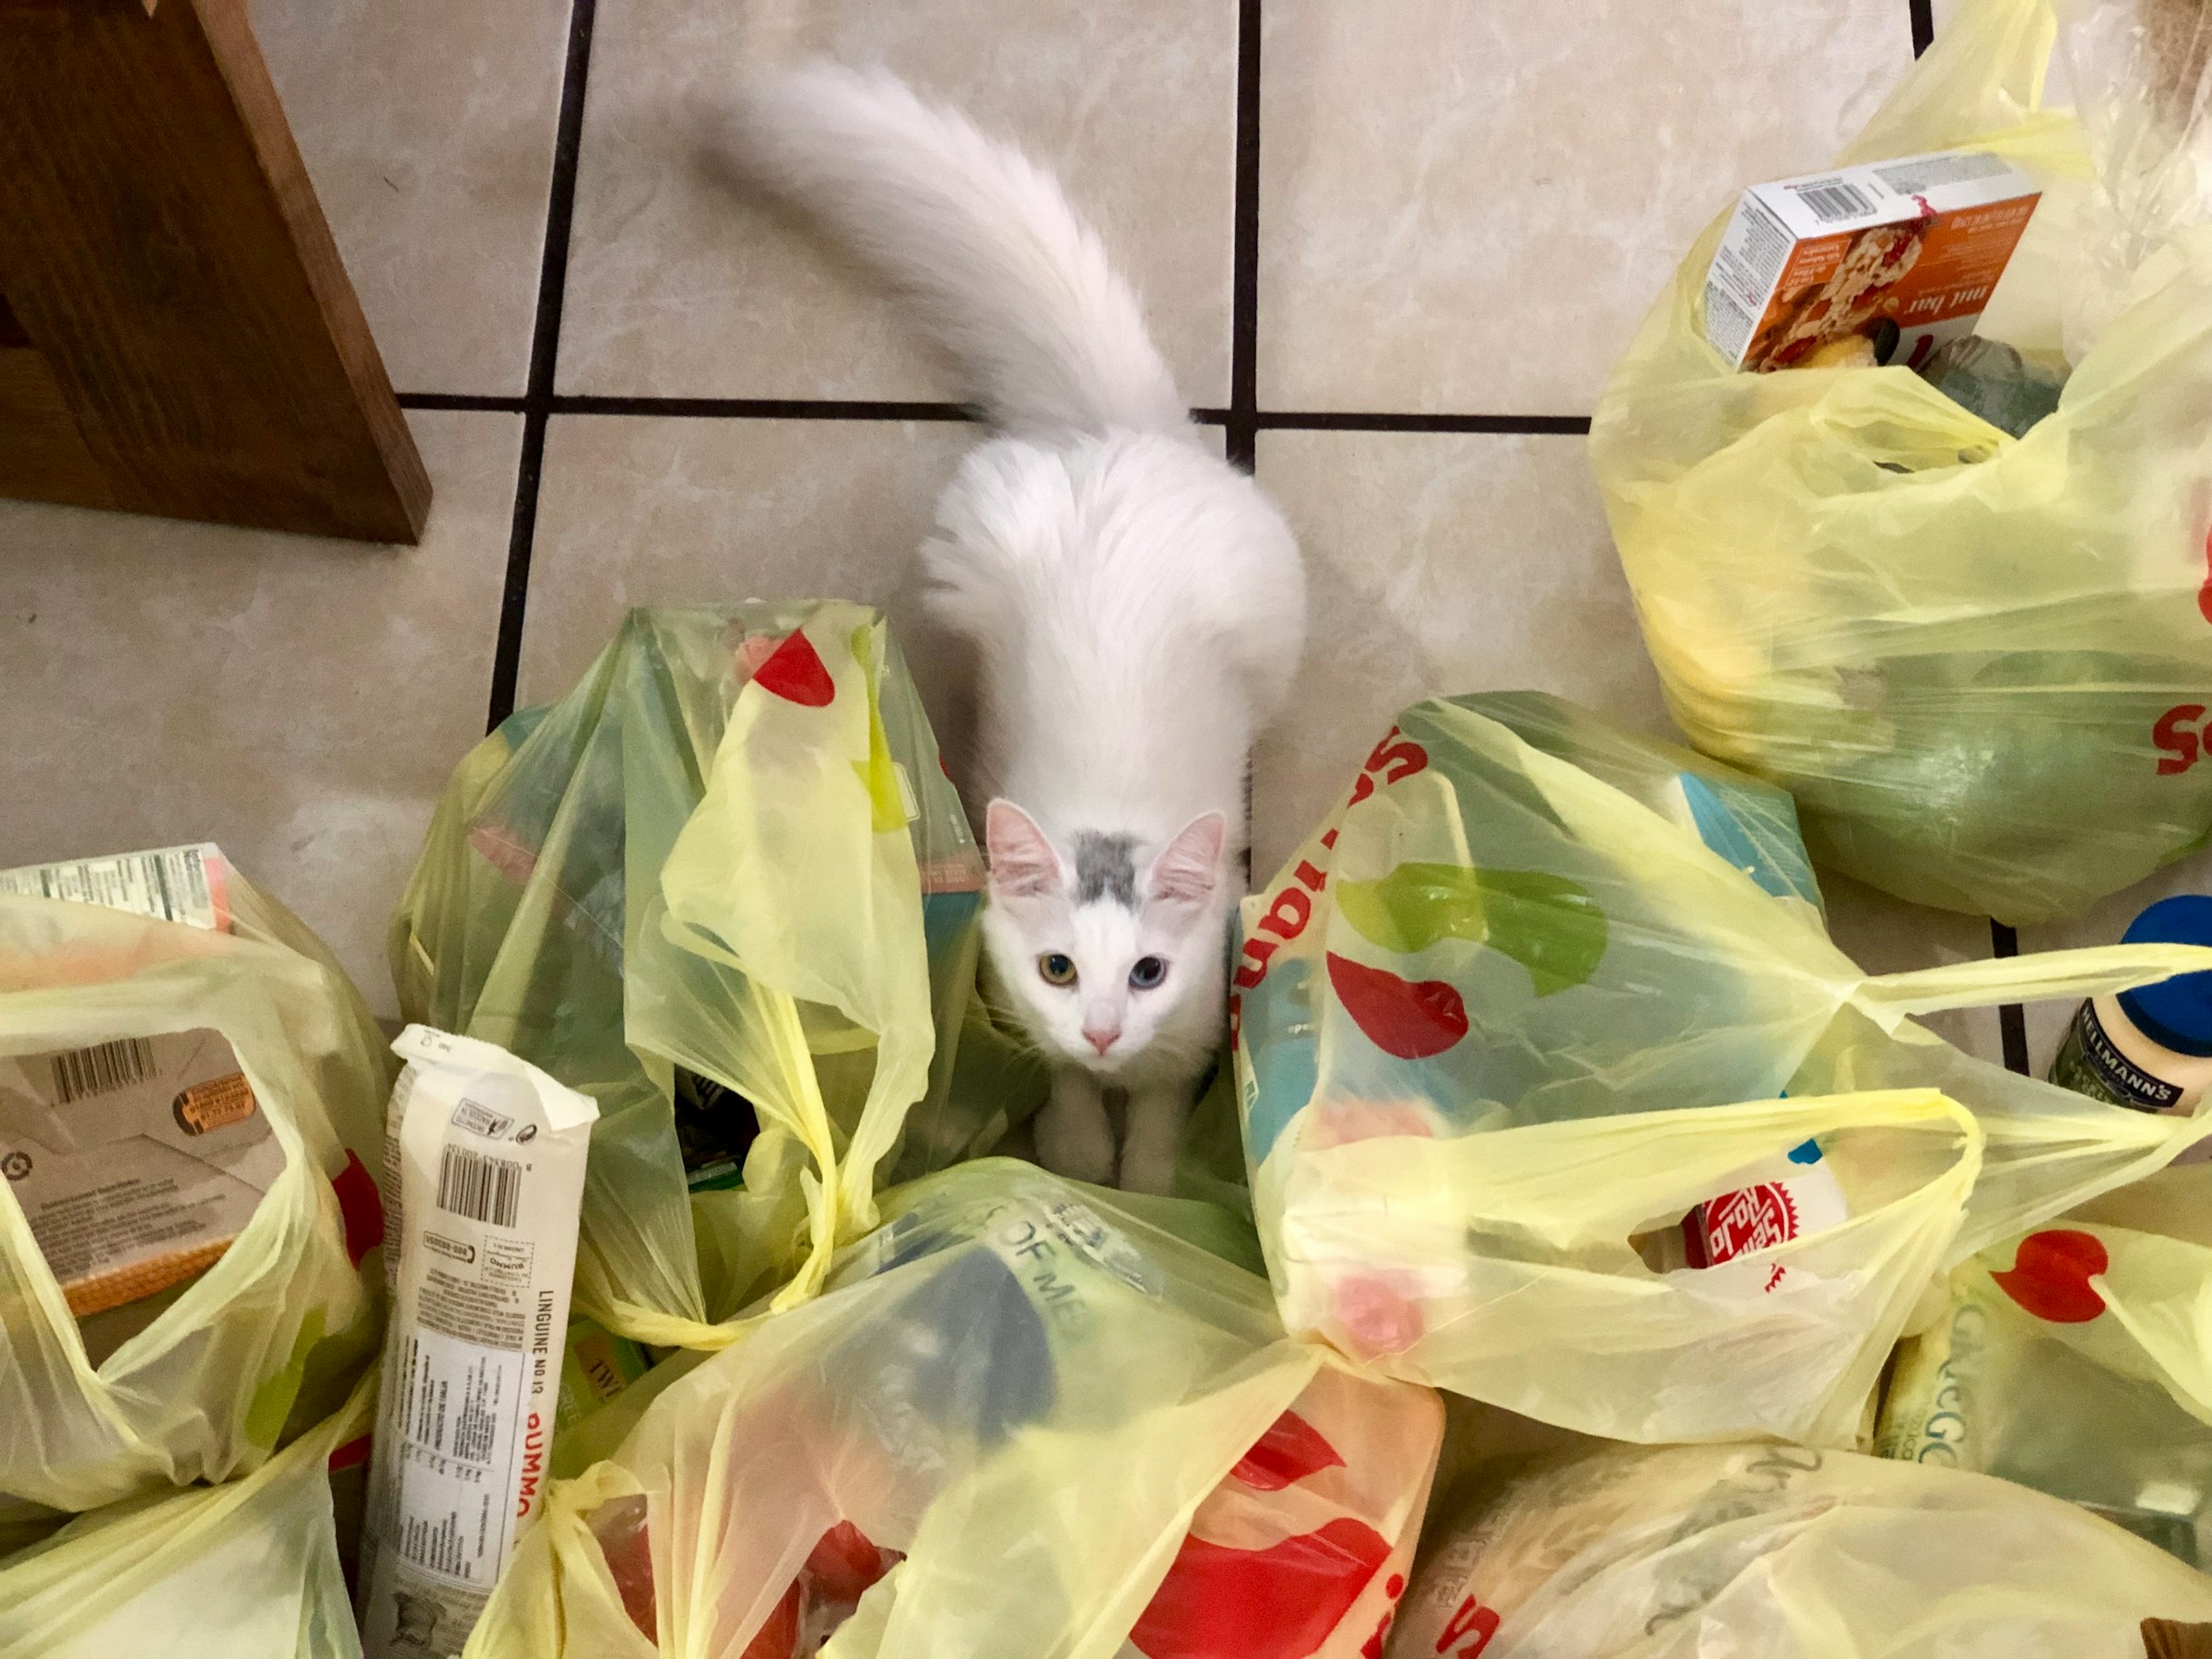 A cat among grocery bags | Source: Unsplash